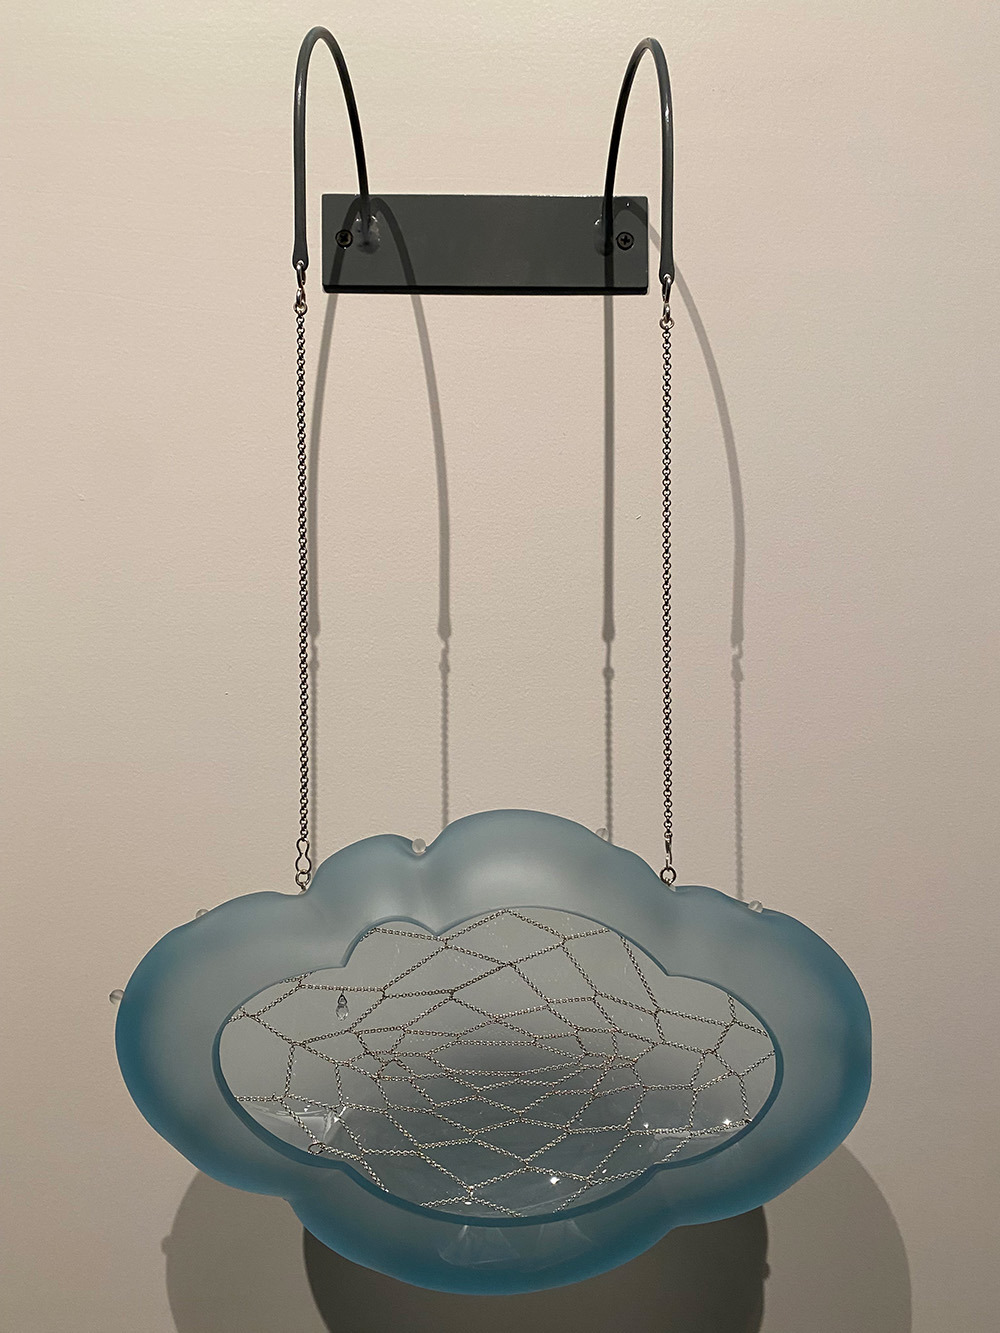 Dream Cloud is made from cut and hand-sculpted glass, silver, and steel. A blue glass cloud is suspended out from the wall by two chains which are attached to a steel wall mount.